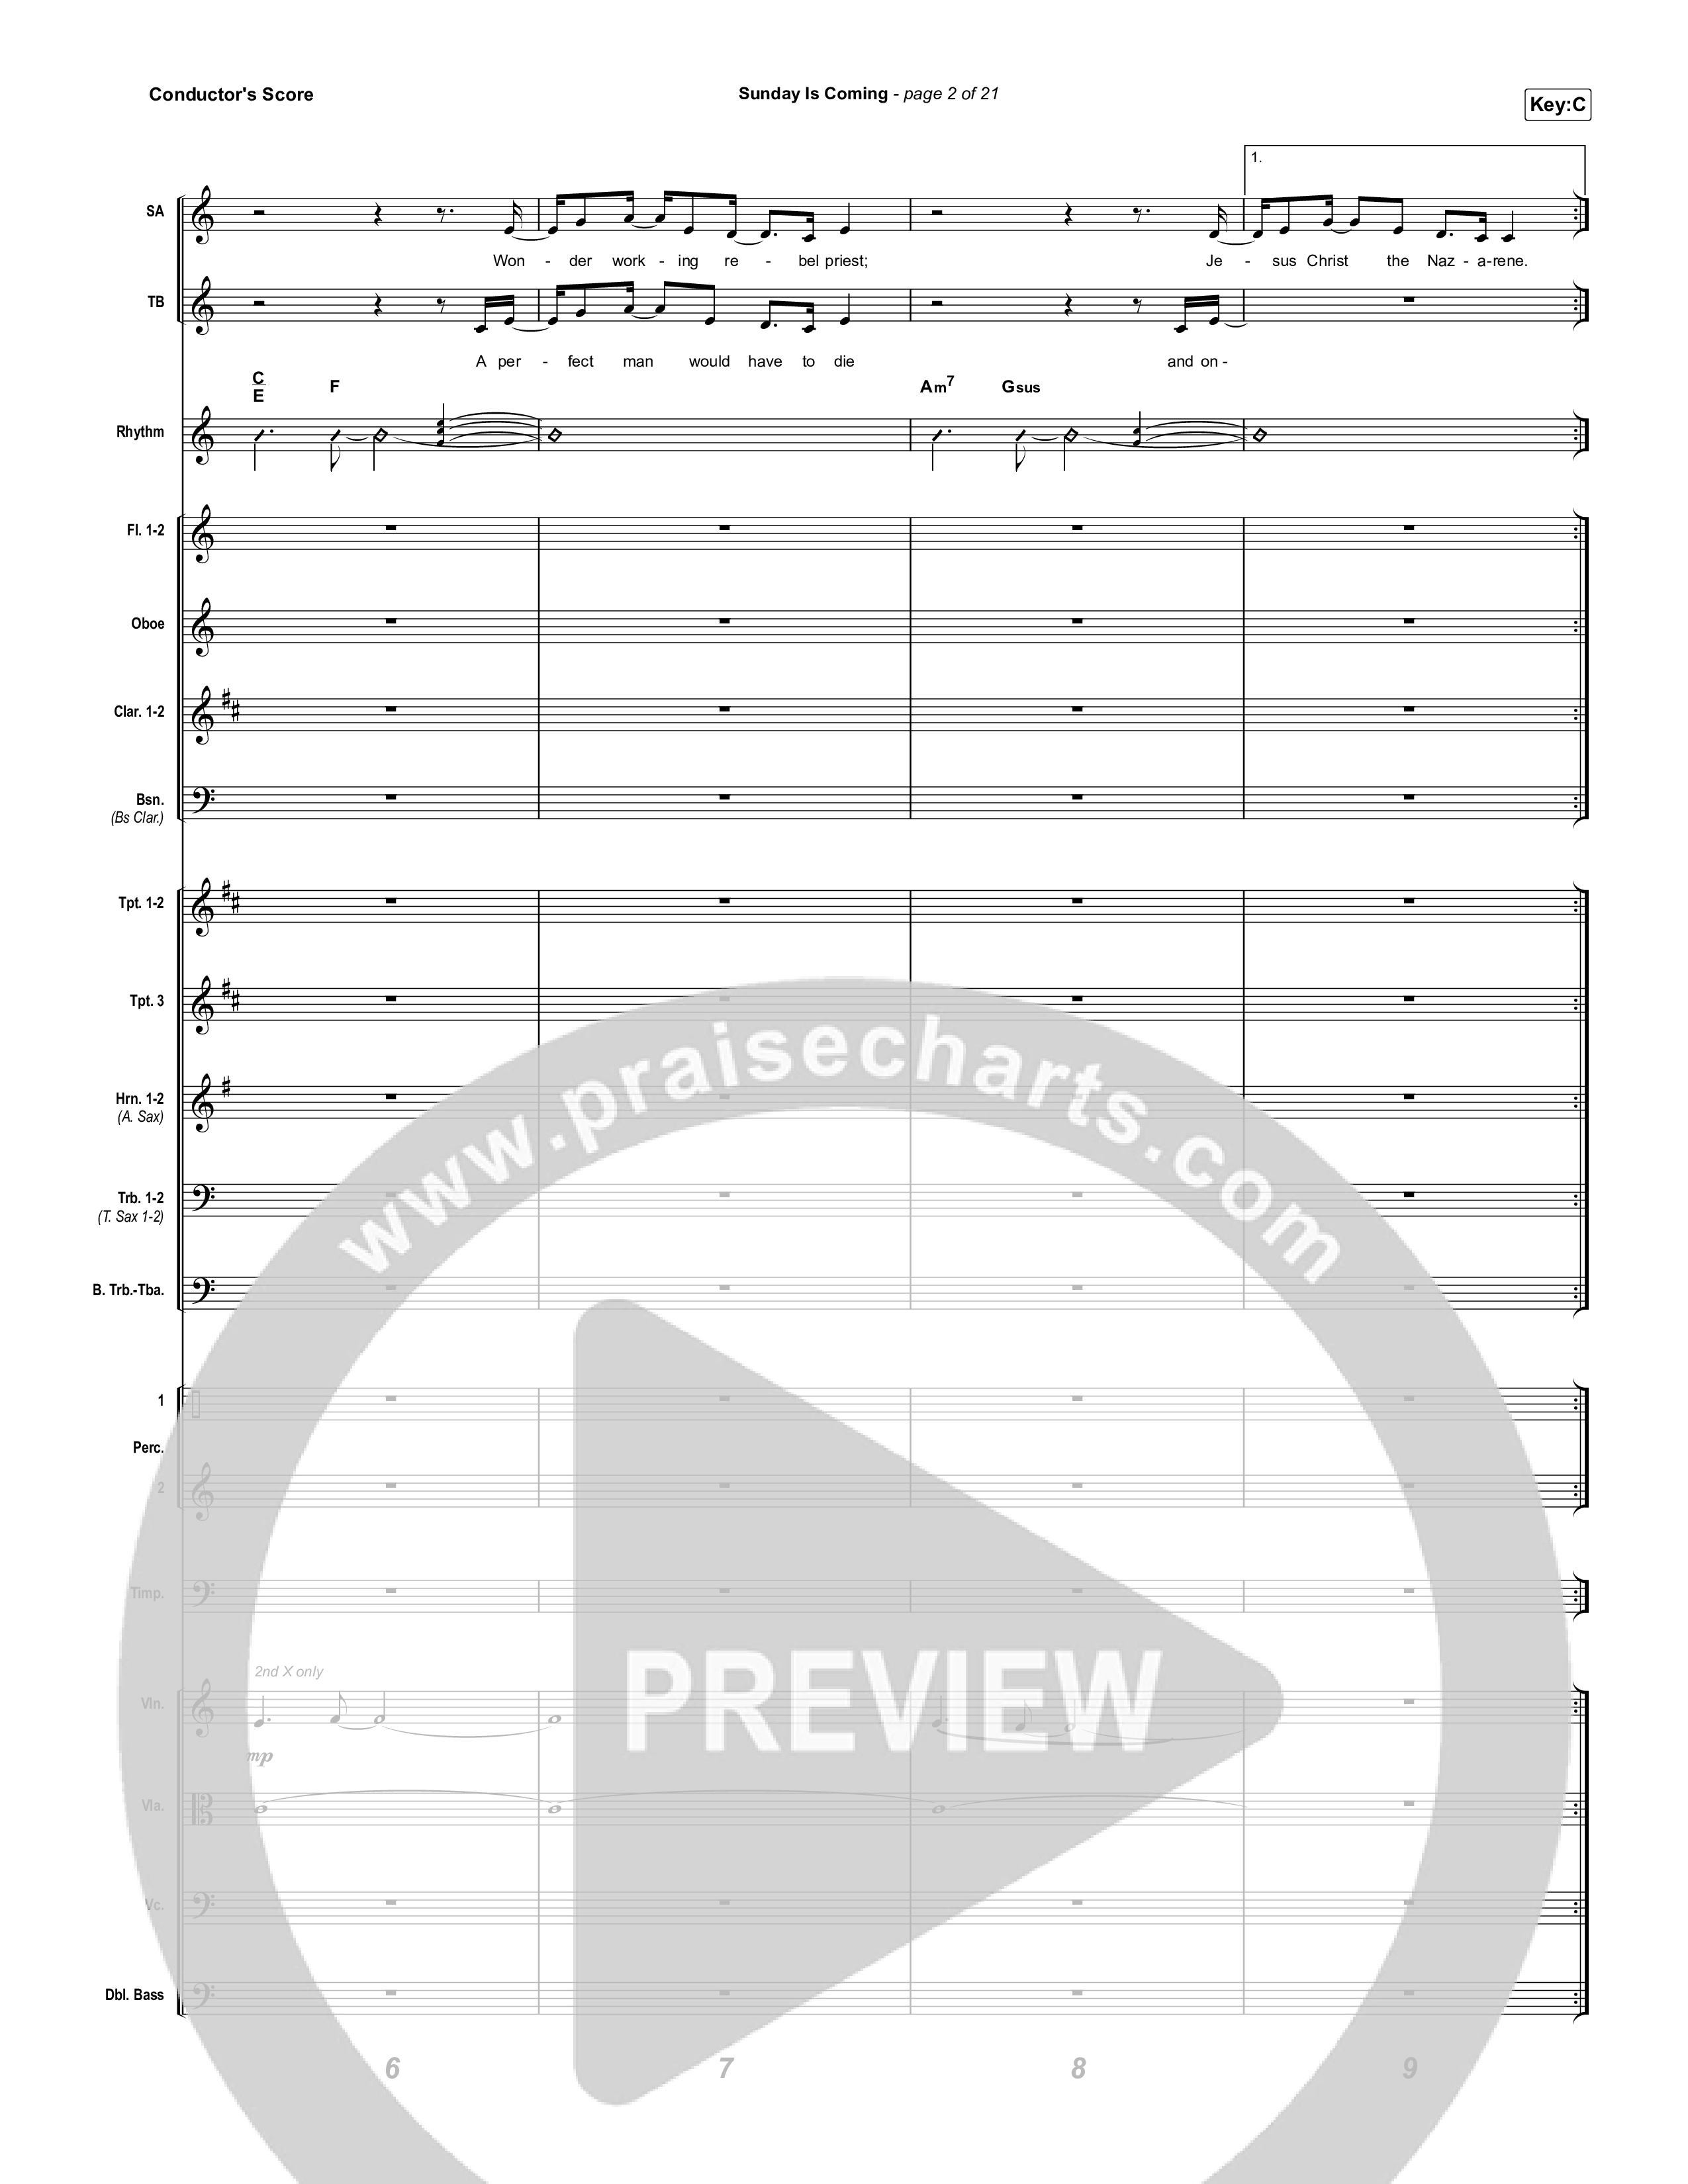 Sunday Is Coming Conductor's Score (The Worship Initiative / John Marc Kohl)